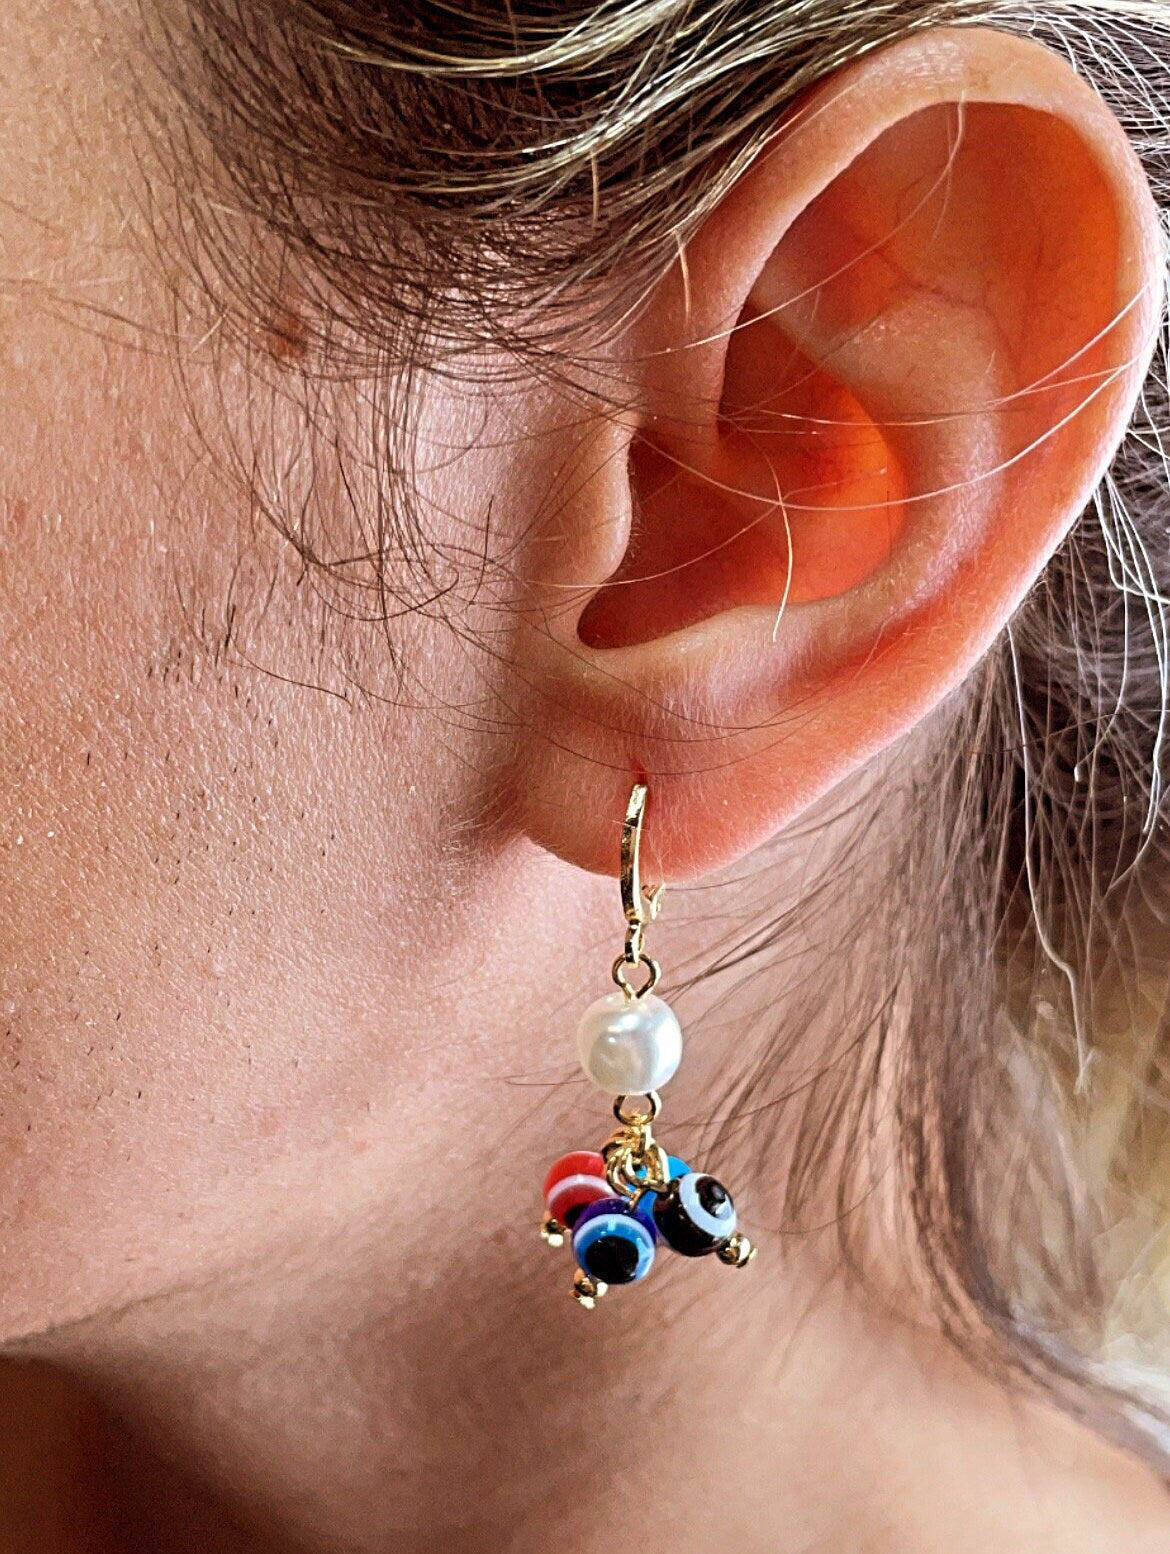 18k Gold Layered Pearl and Evil Eyes Dangling Earrings Featuring Red, Blue, Black